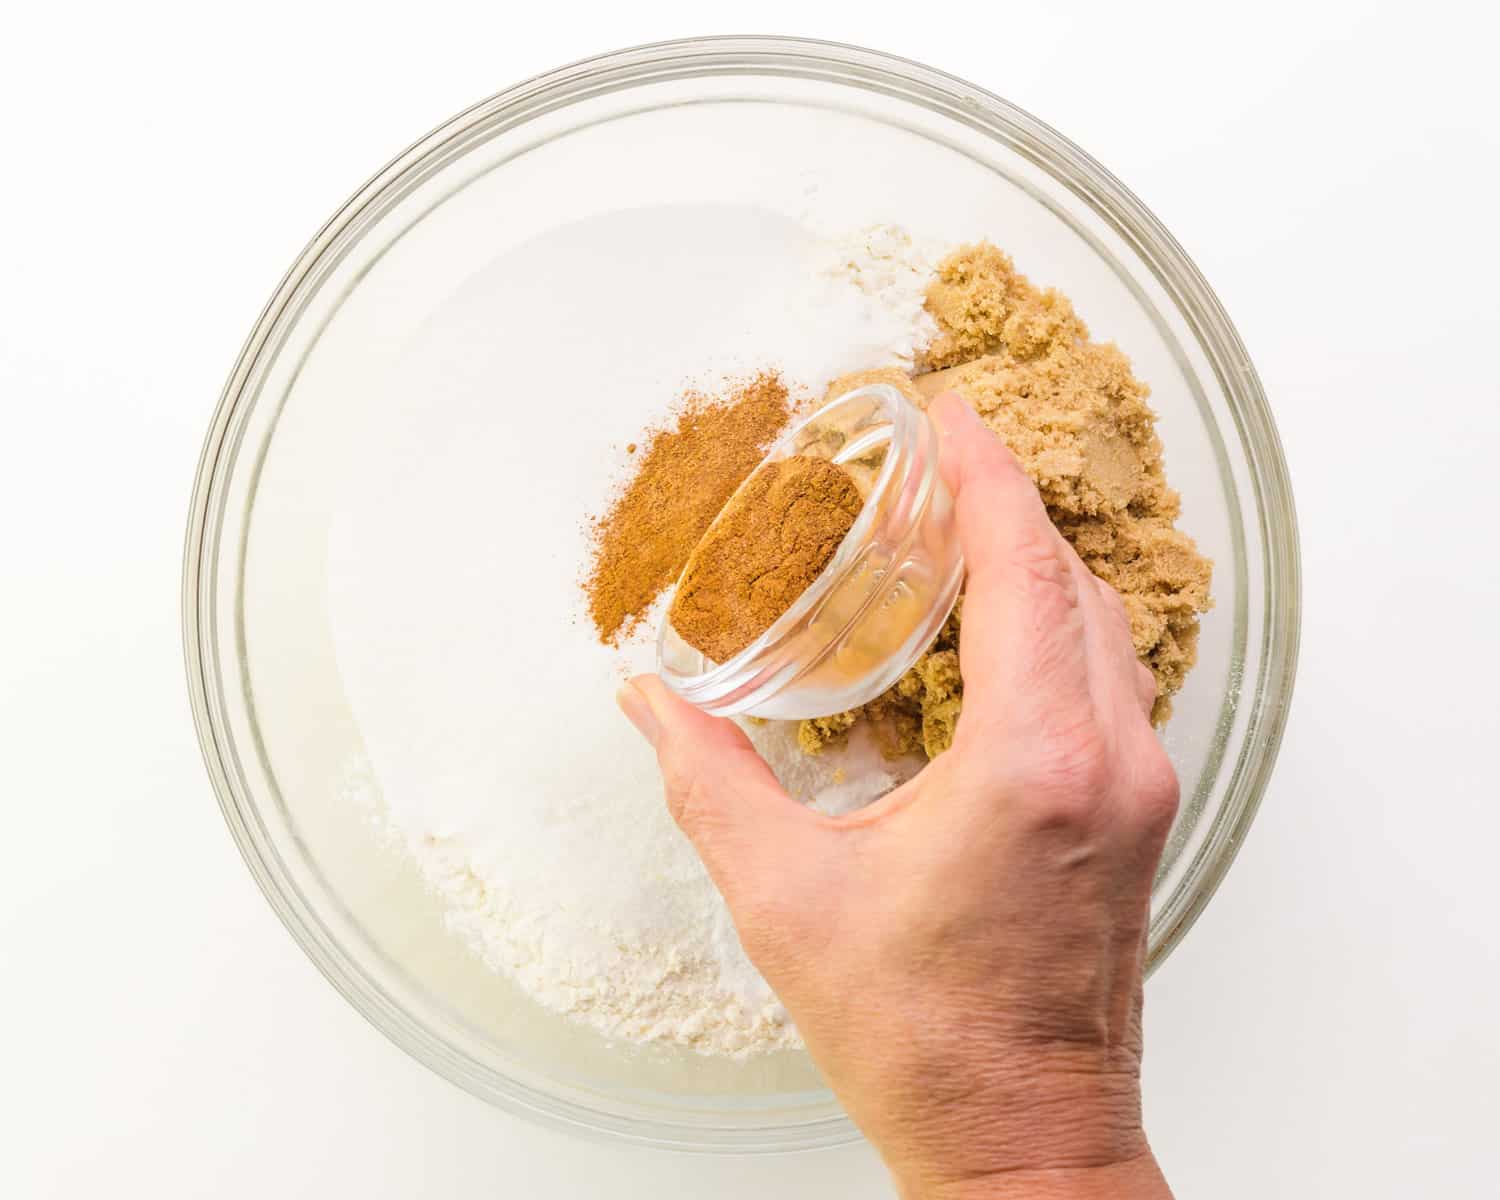 A hand pours a bowl of spices into a mixing bowl with four, sugar and other ingredients.